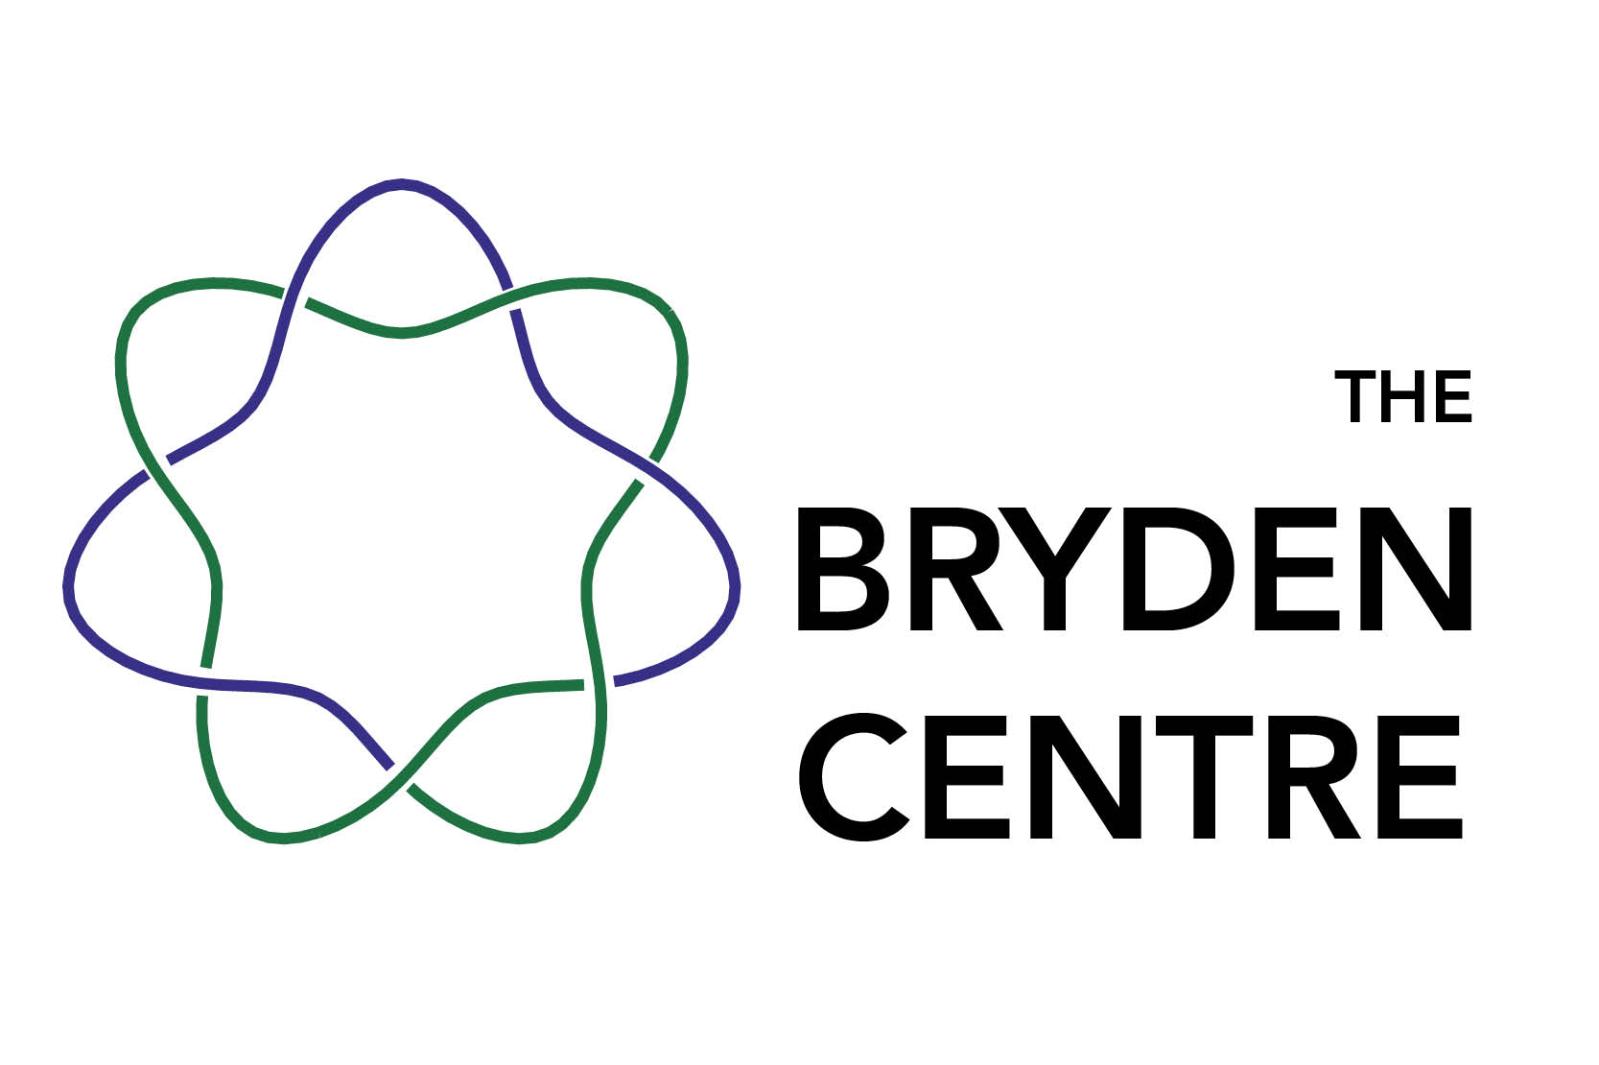 The logo for the Bryden Centre